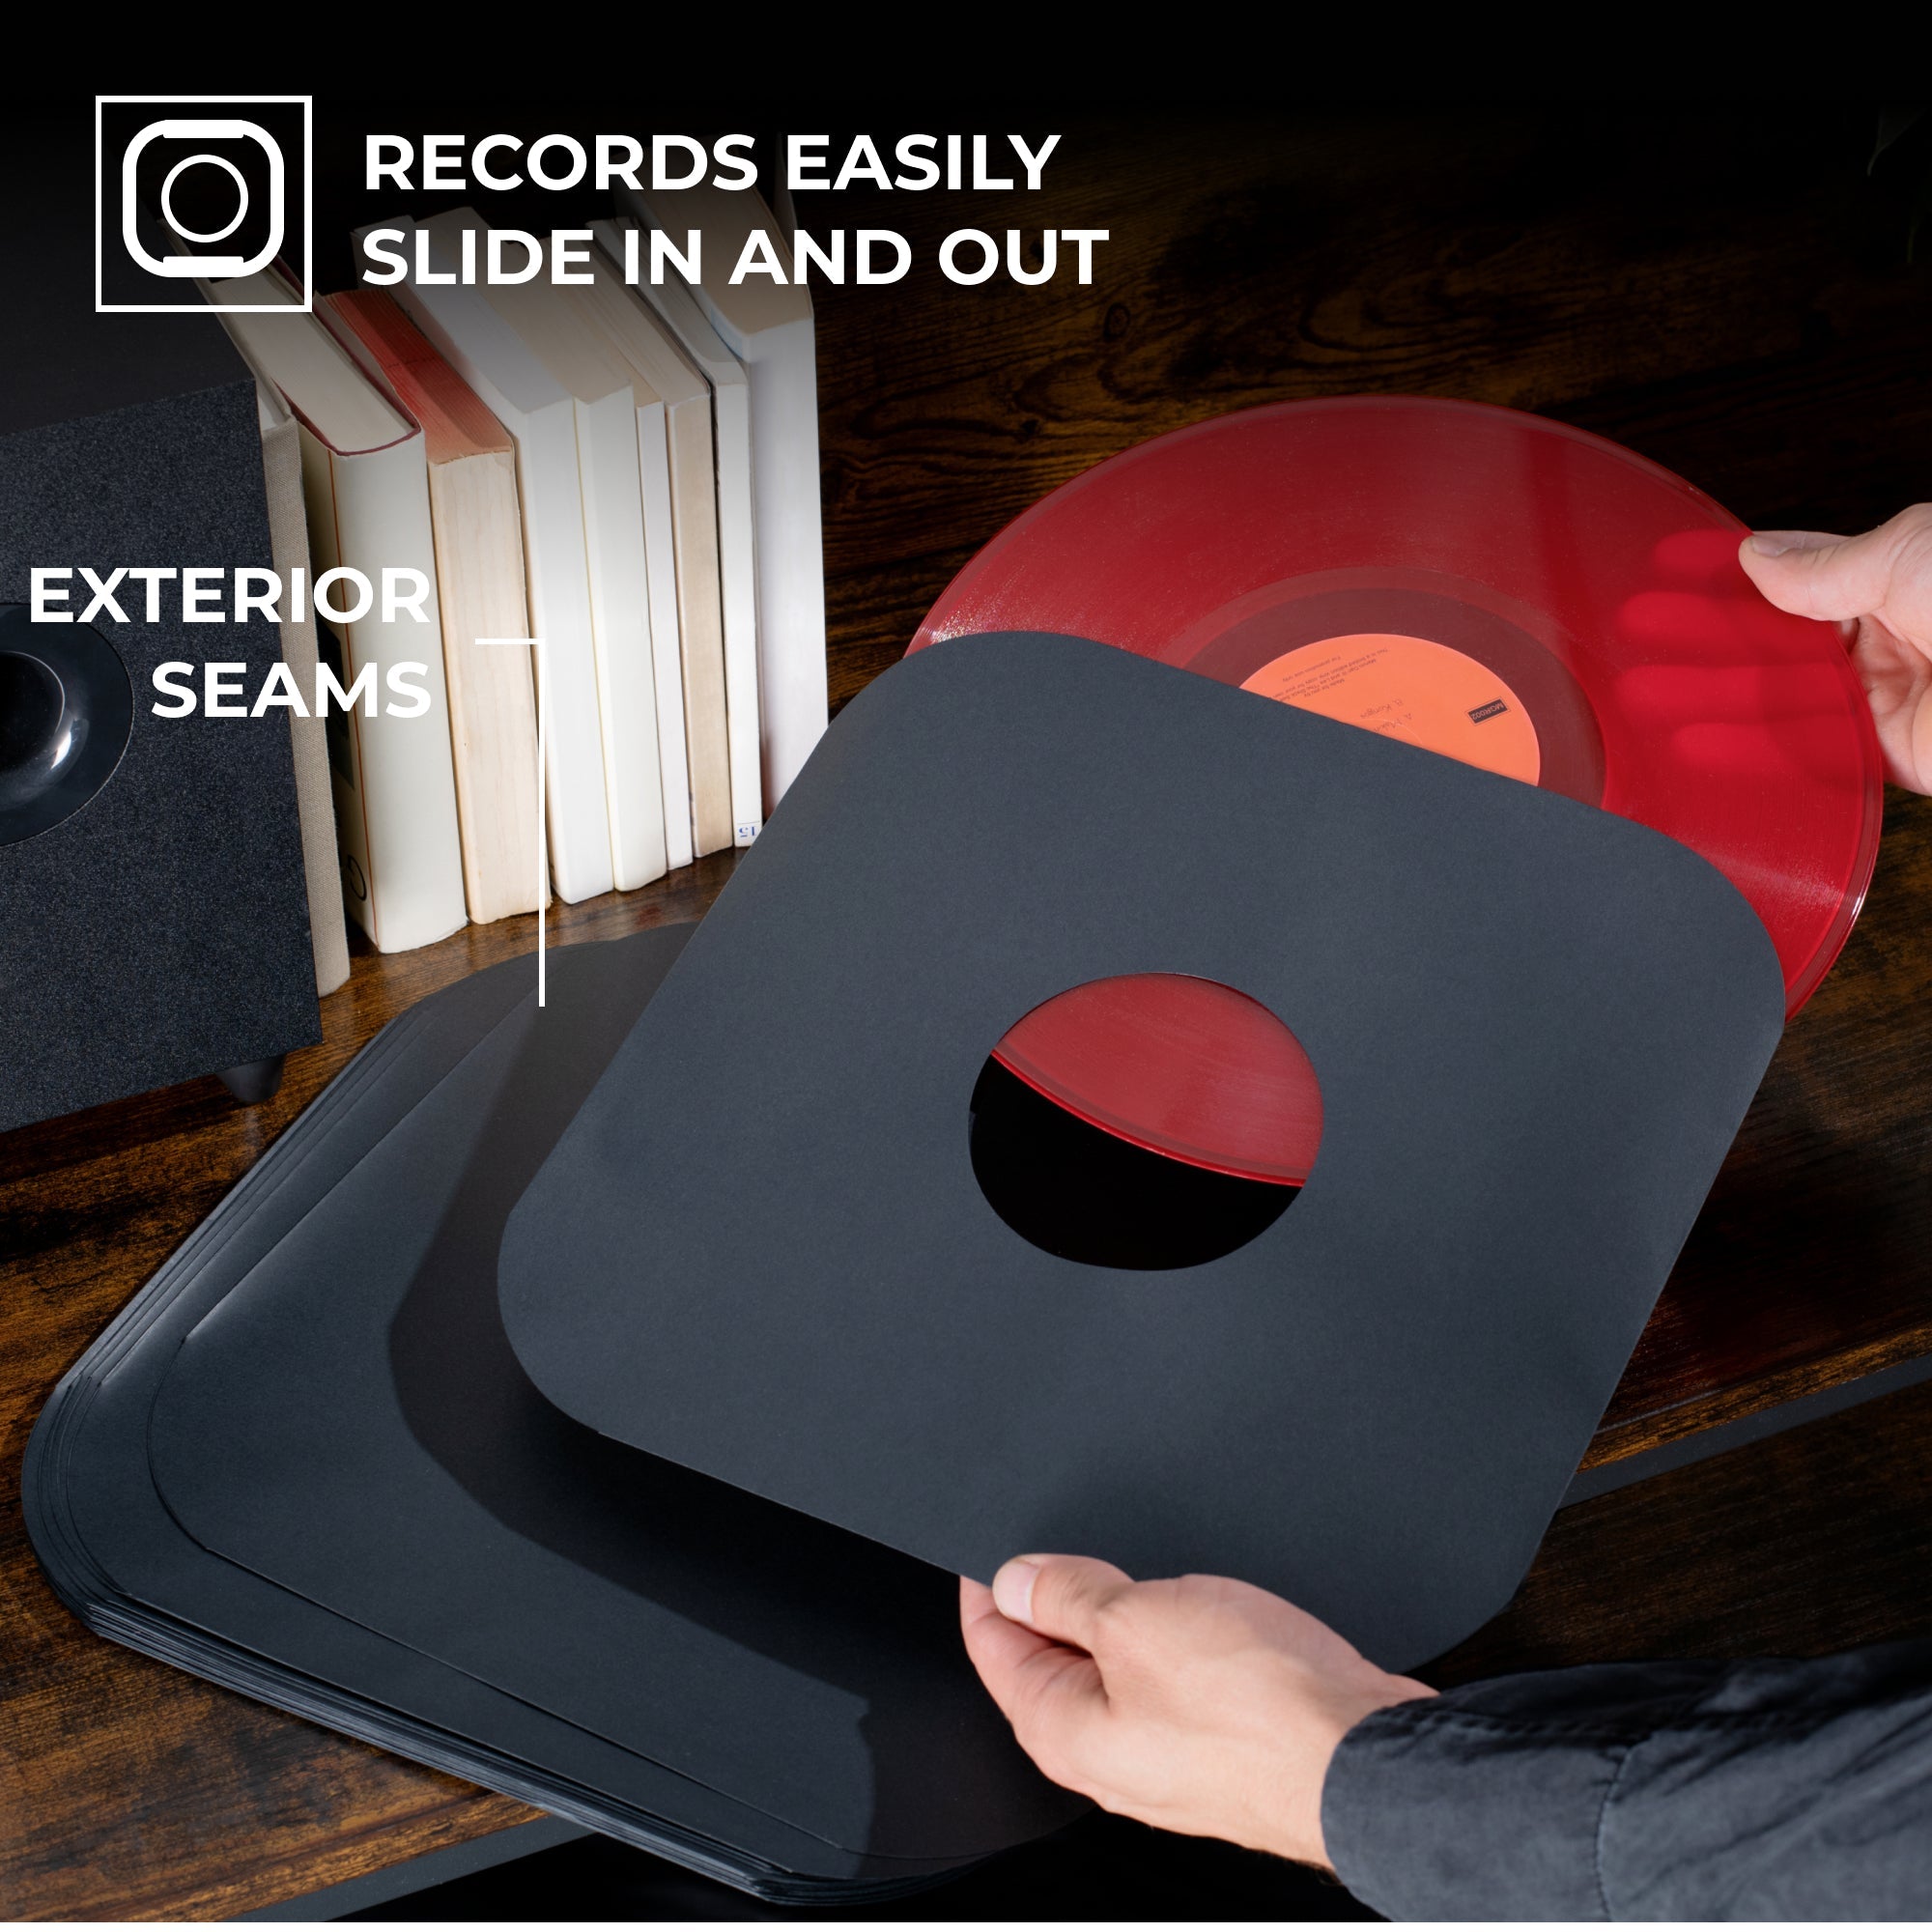 Records-easily-slide-in-and-out